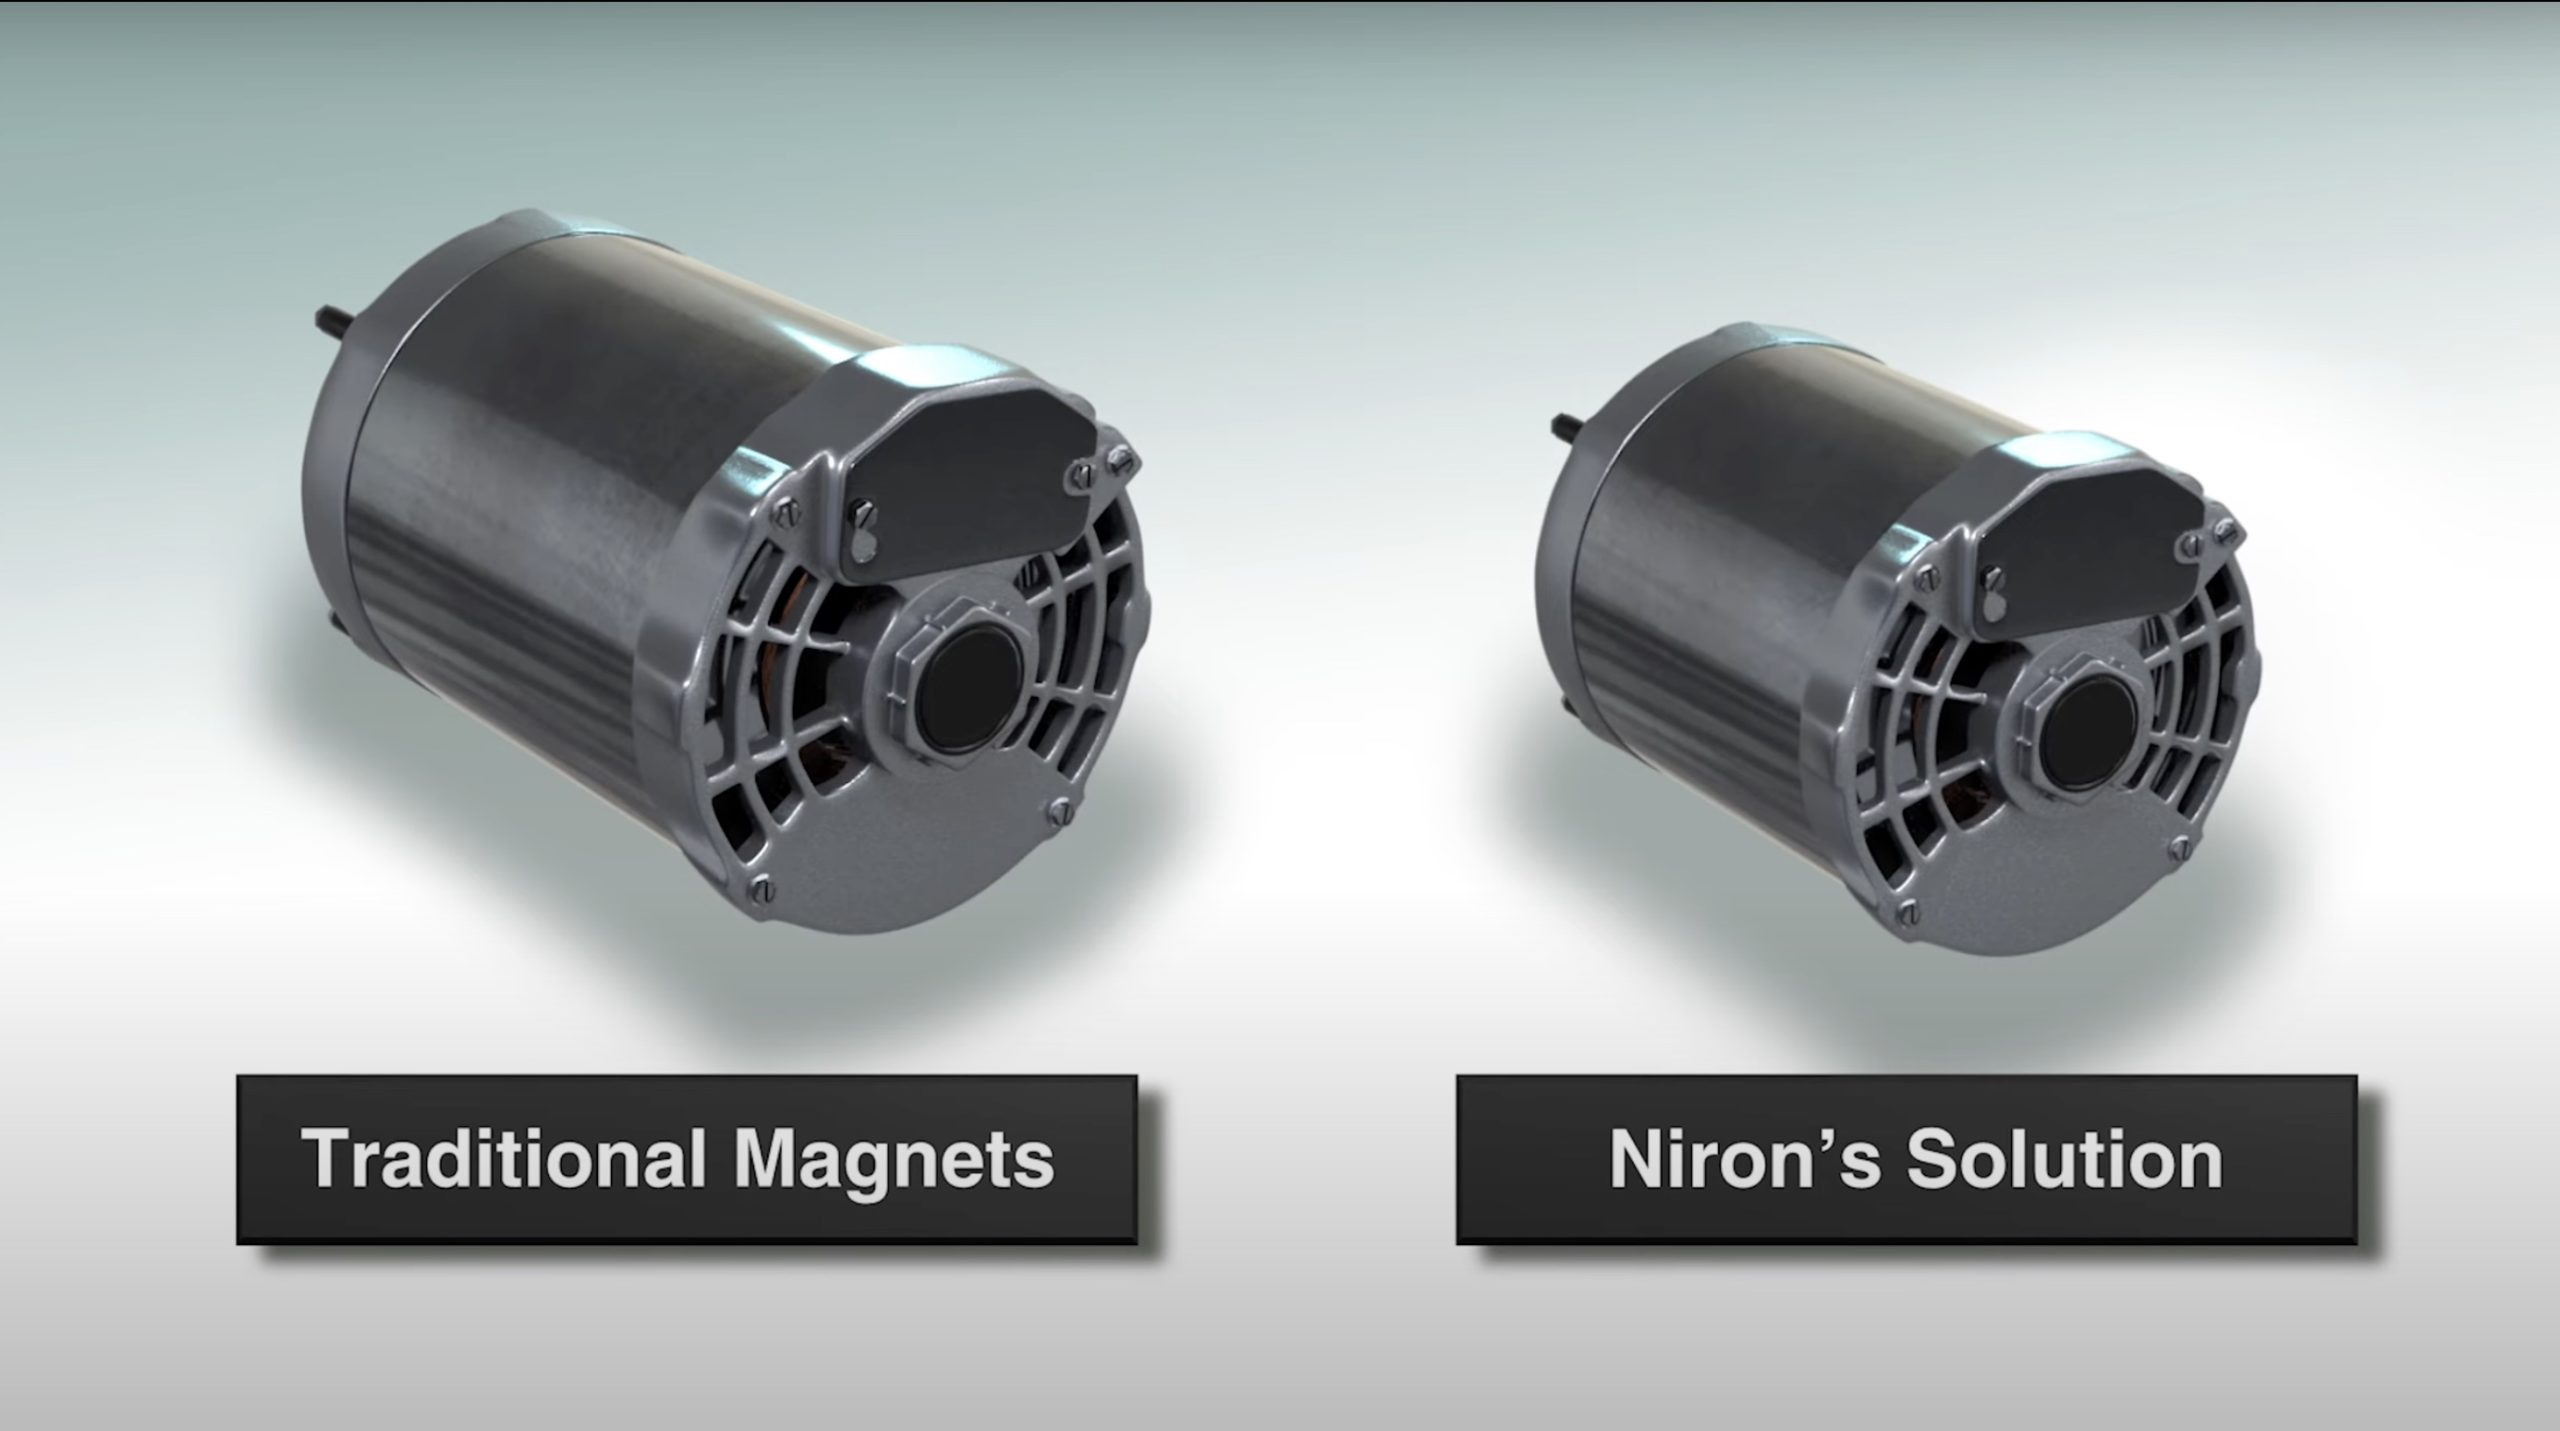 General Motors to develop sustainable EV Motor Magnets with Niron Magnetics